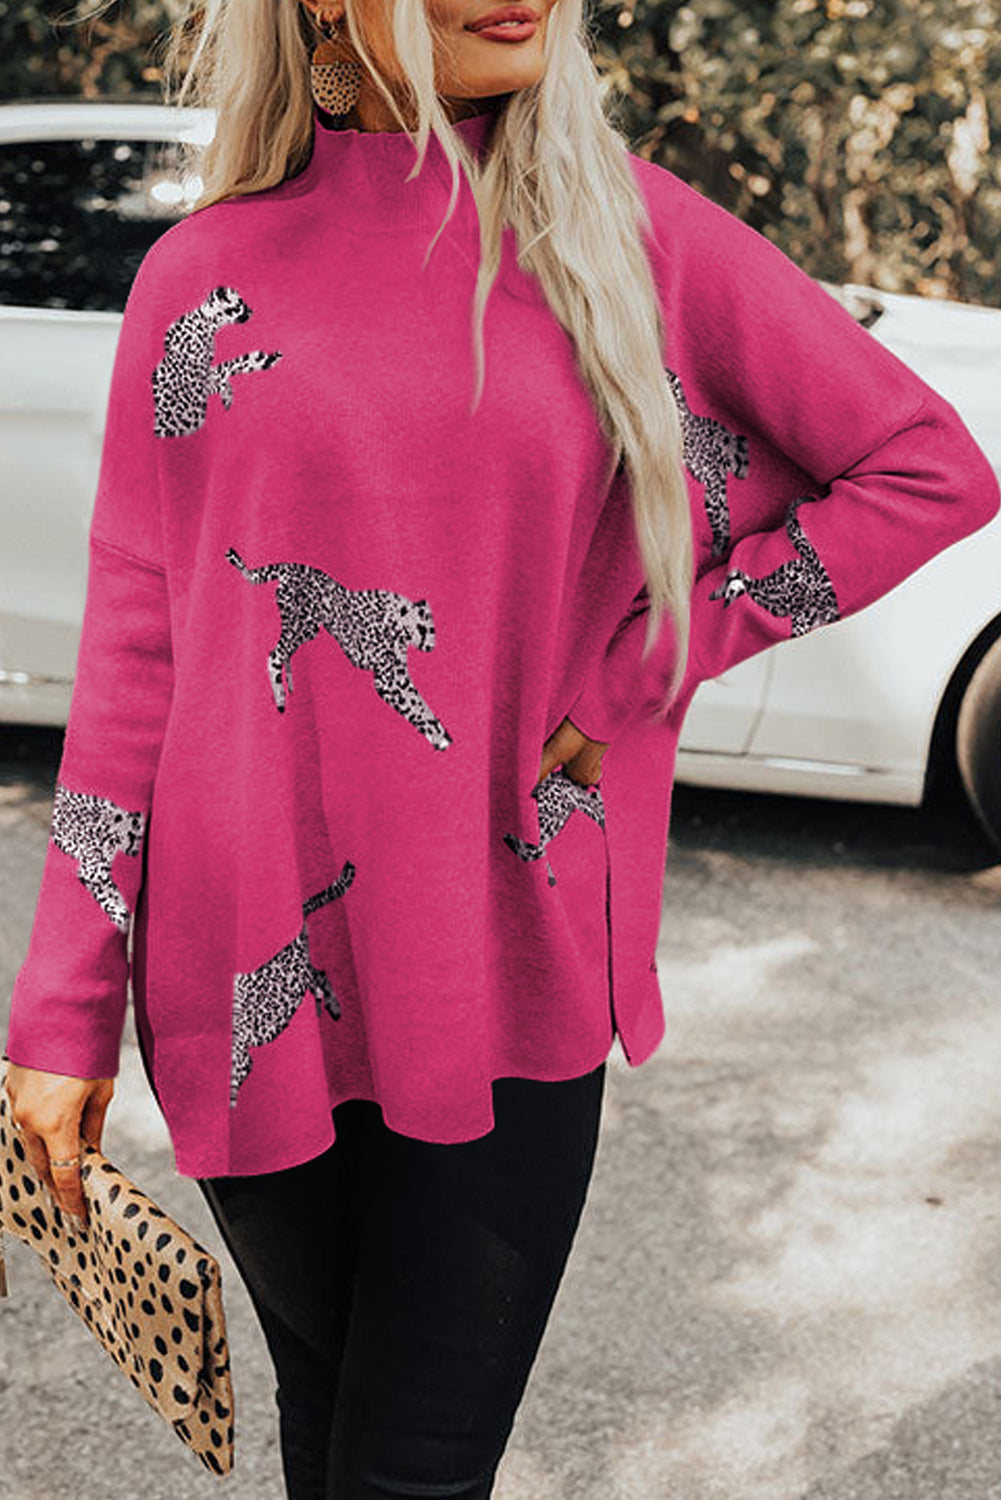 Rose Cheetah Print high neck sweater with slits